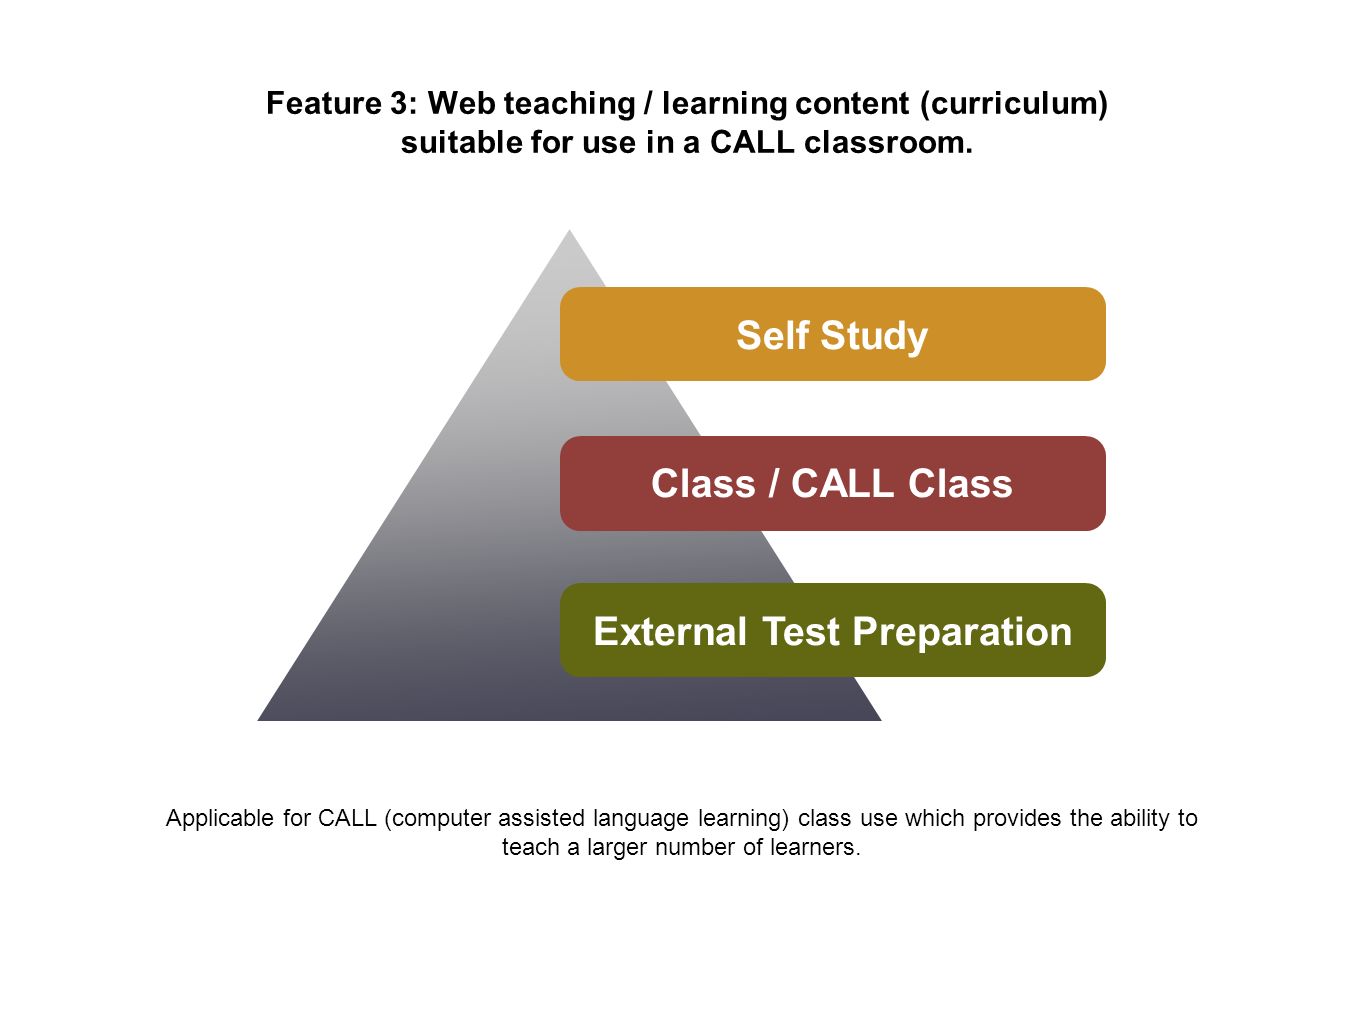 Feature 3: Web teaching / learning content (curriculum) suitable for use in a CALL classroom.